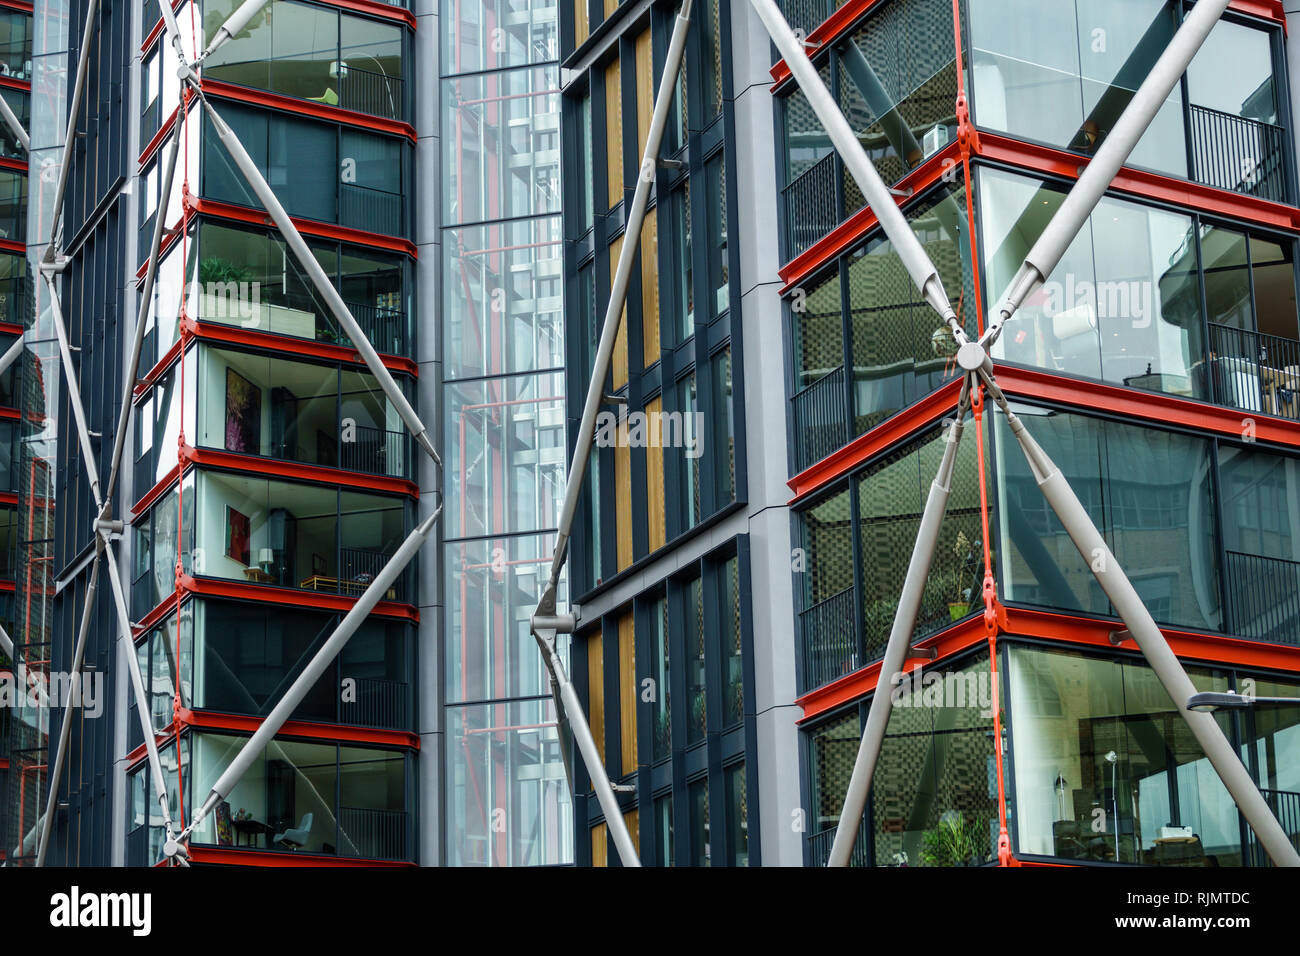 London England United Kingdom Great Britain Southwark Bankside architecture NEO Bankside high-rise flats apartments building exterior outsi Stock Photo